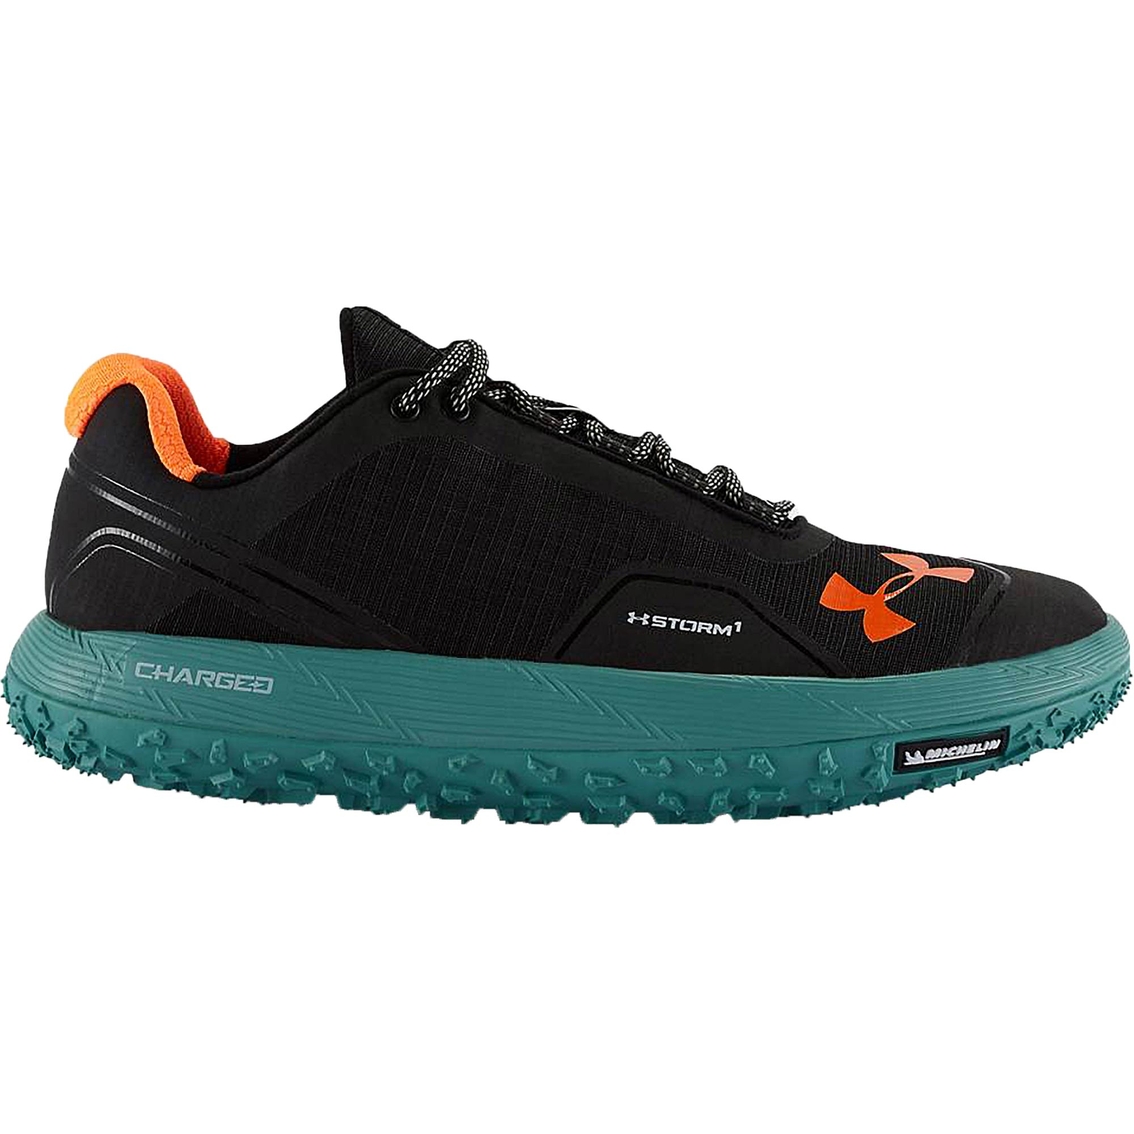 Fat Tire Low Cut Trail Runner Shoes 